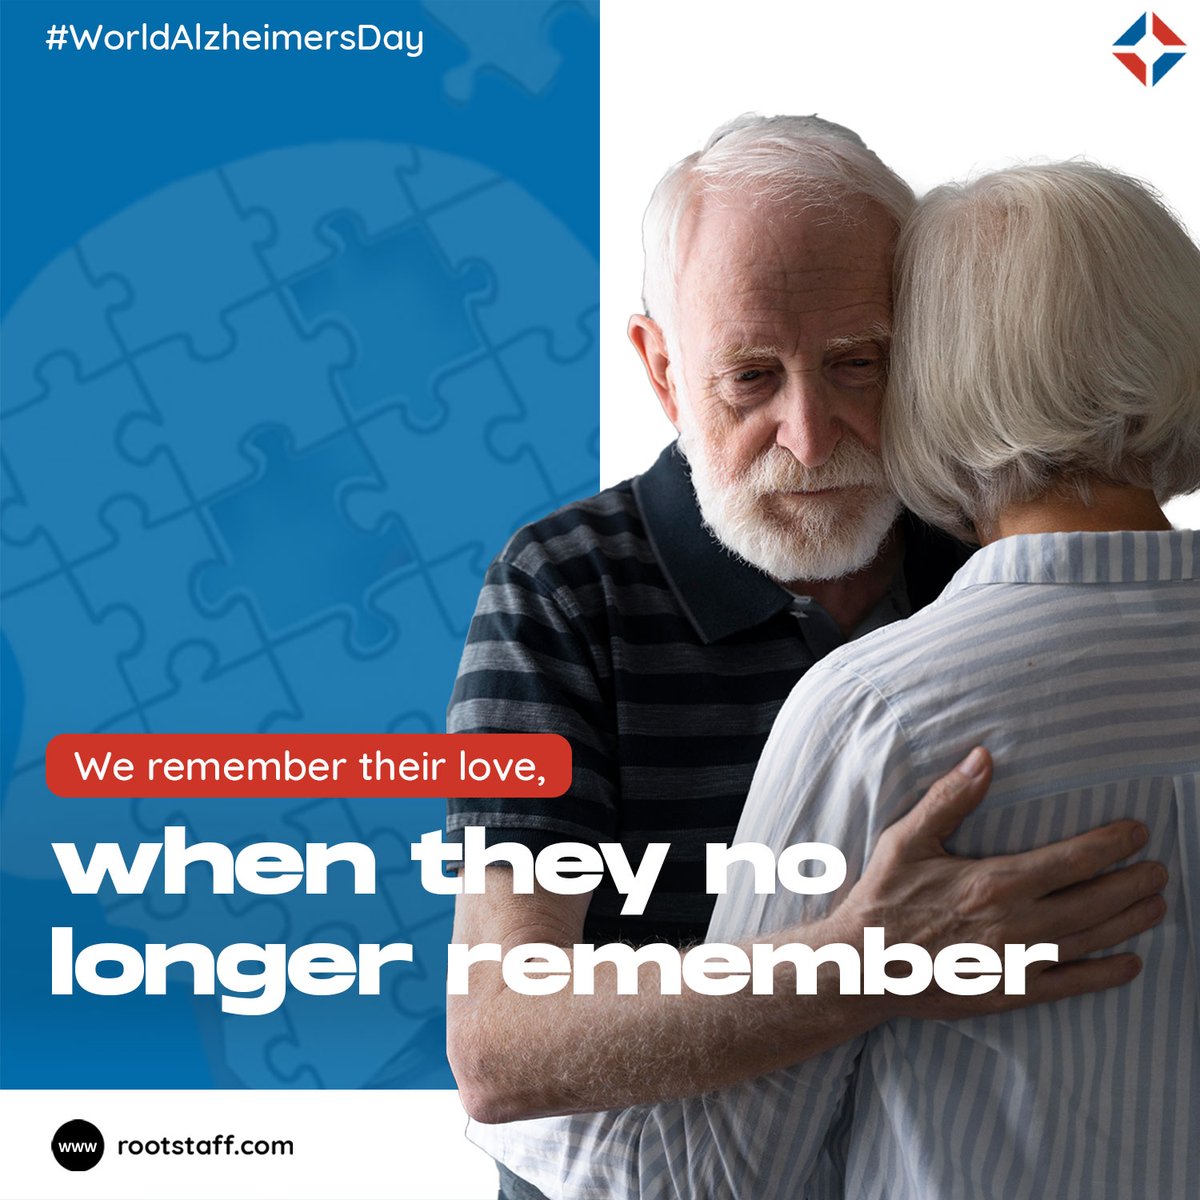 Remembering, Supporting, and Embracing on #WorldAlzheimersDay.

At RootStaff, we stand with those affected and extend our heartfelt care. 💕

#nevertooearlynevertoolate #memorymatters #alzheimersawareness #Rootstaff #staffingsolutions #usrecruitment #contingentworkforce